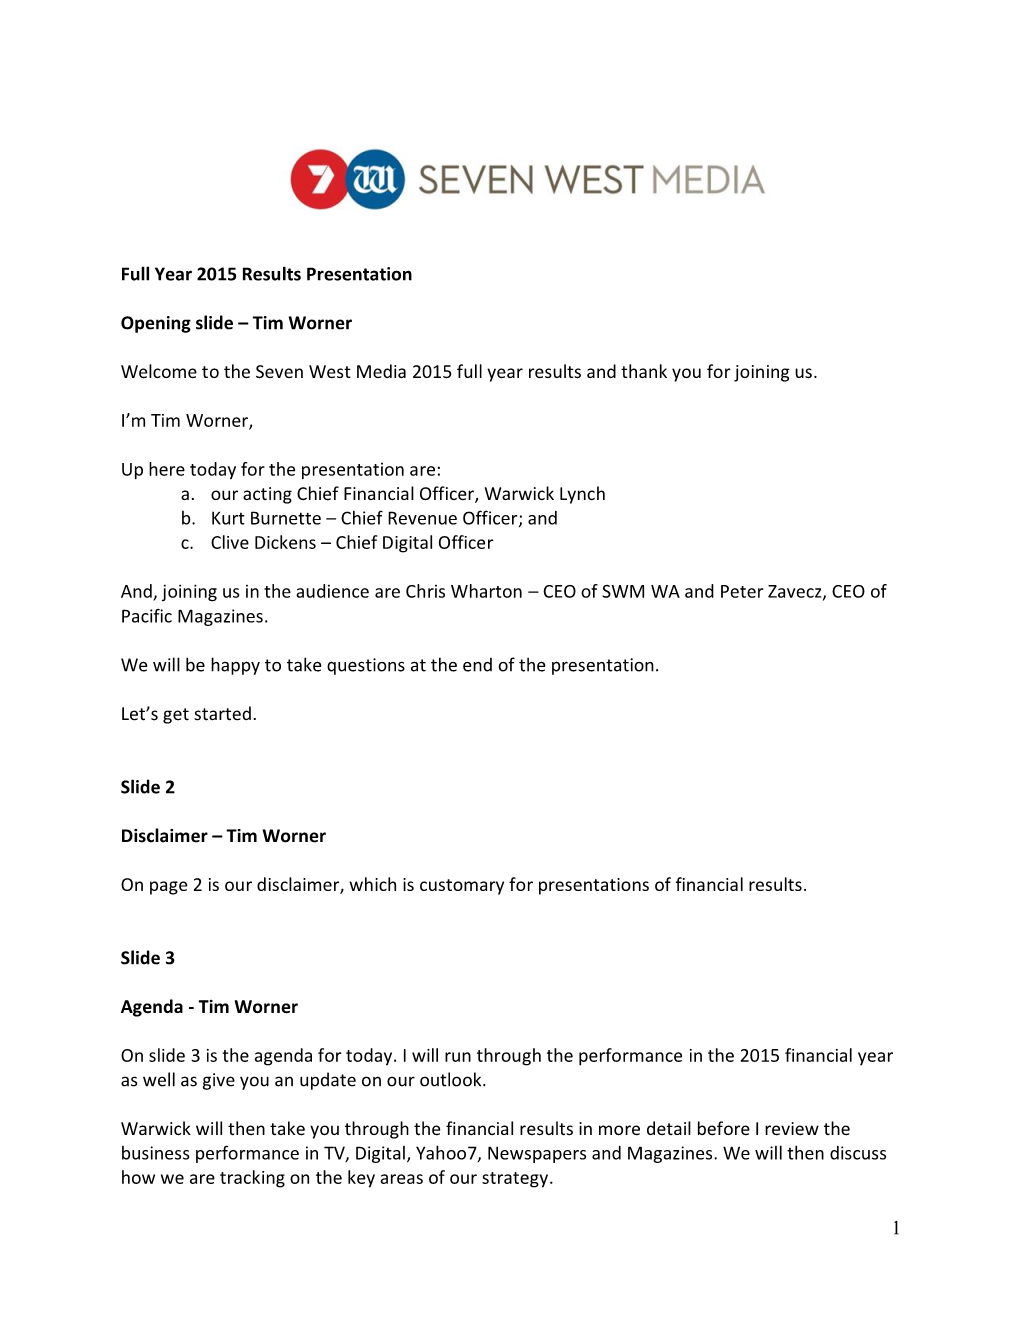 Tim Worner Welcome to the Seven West Media 2015 Full Year Results and Th